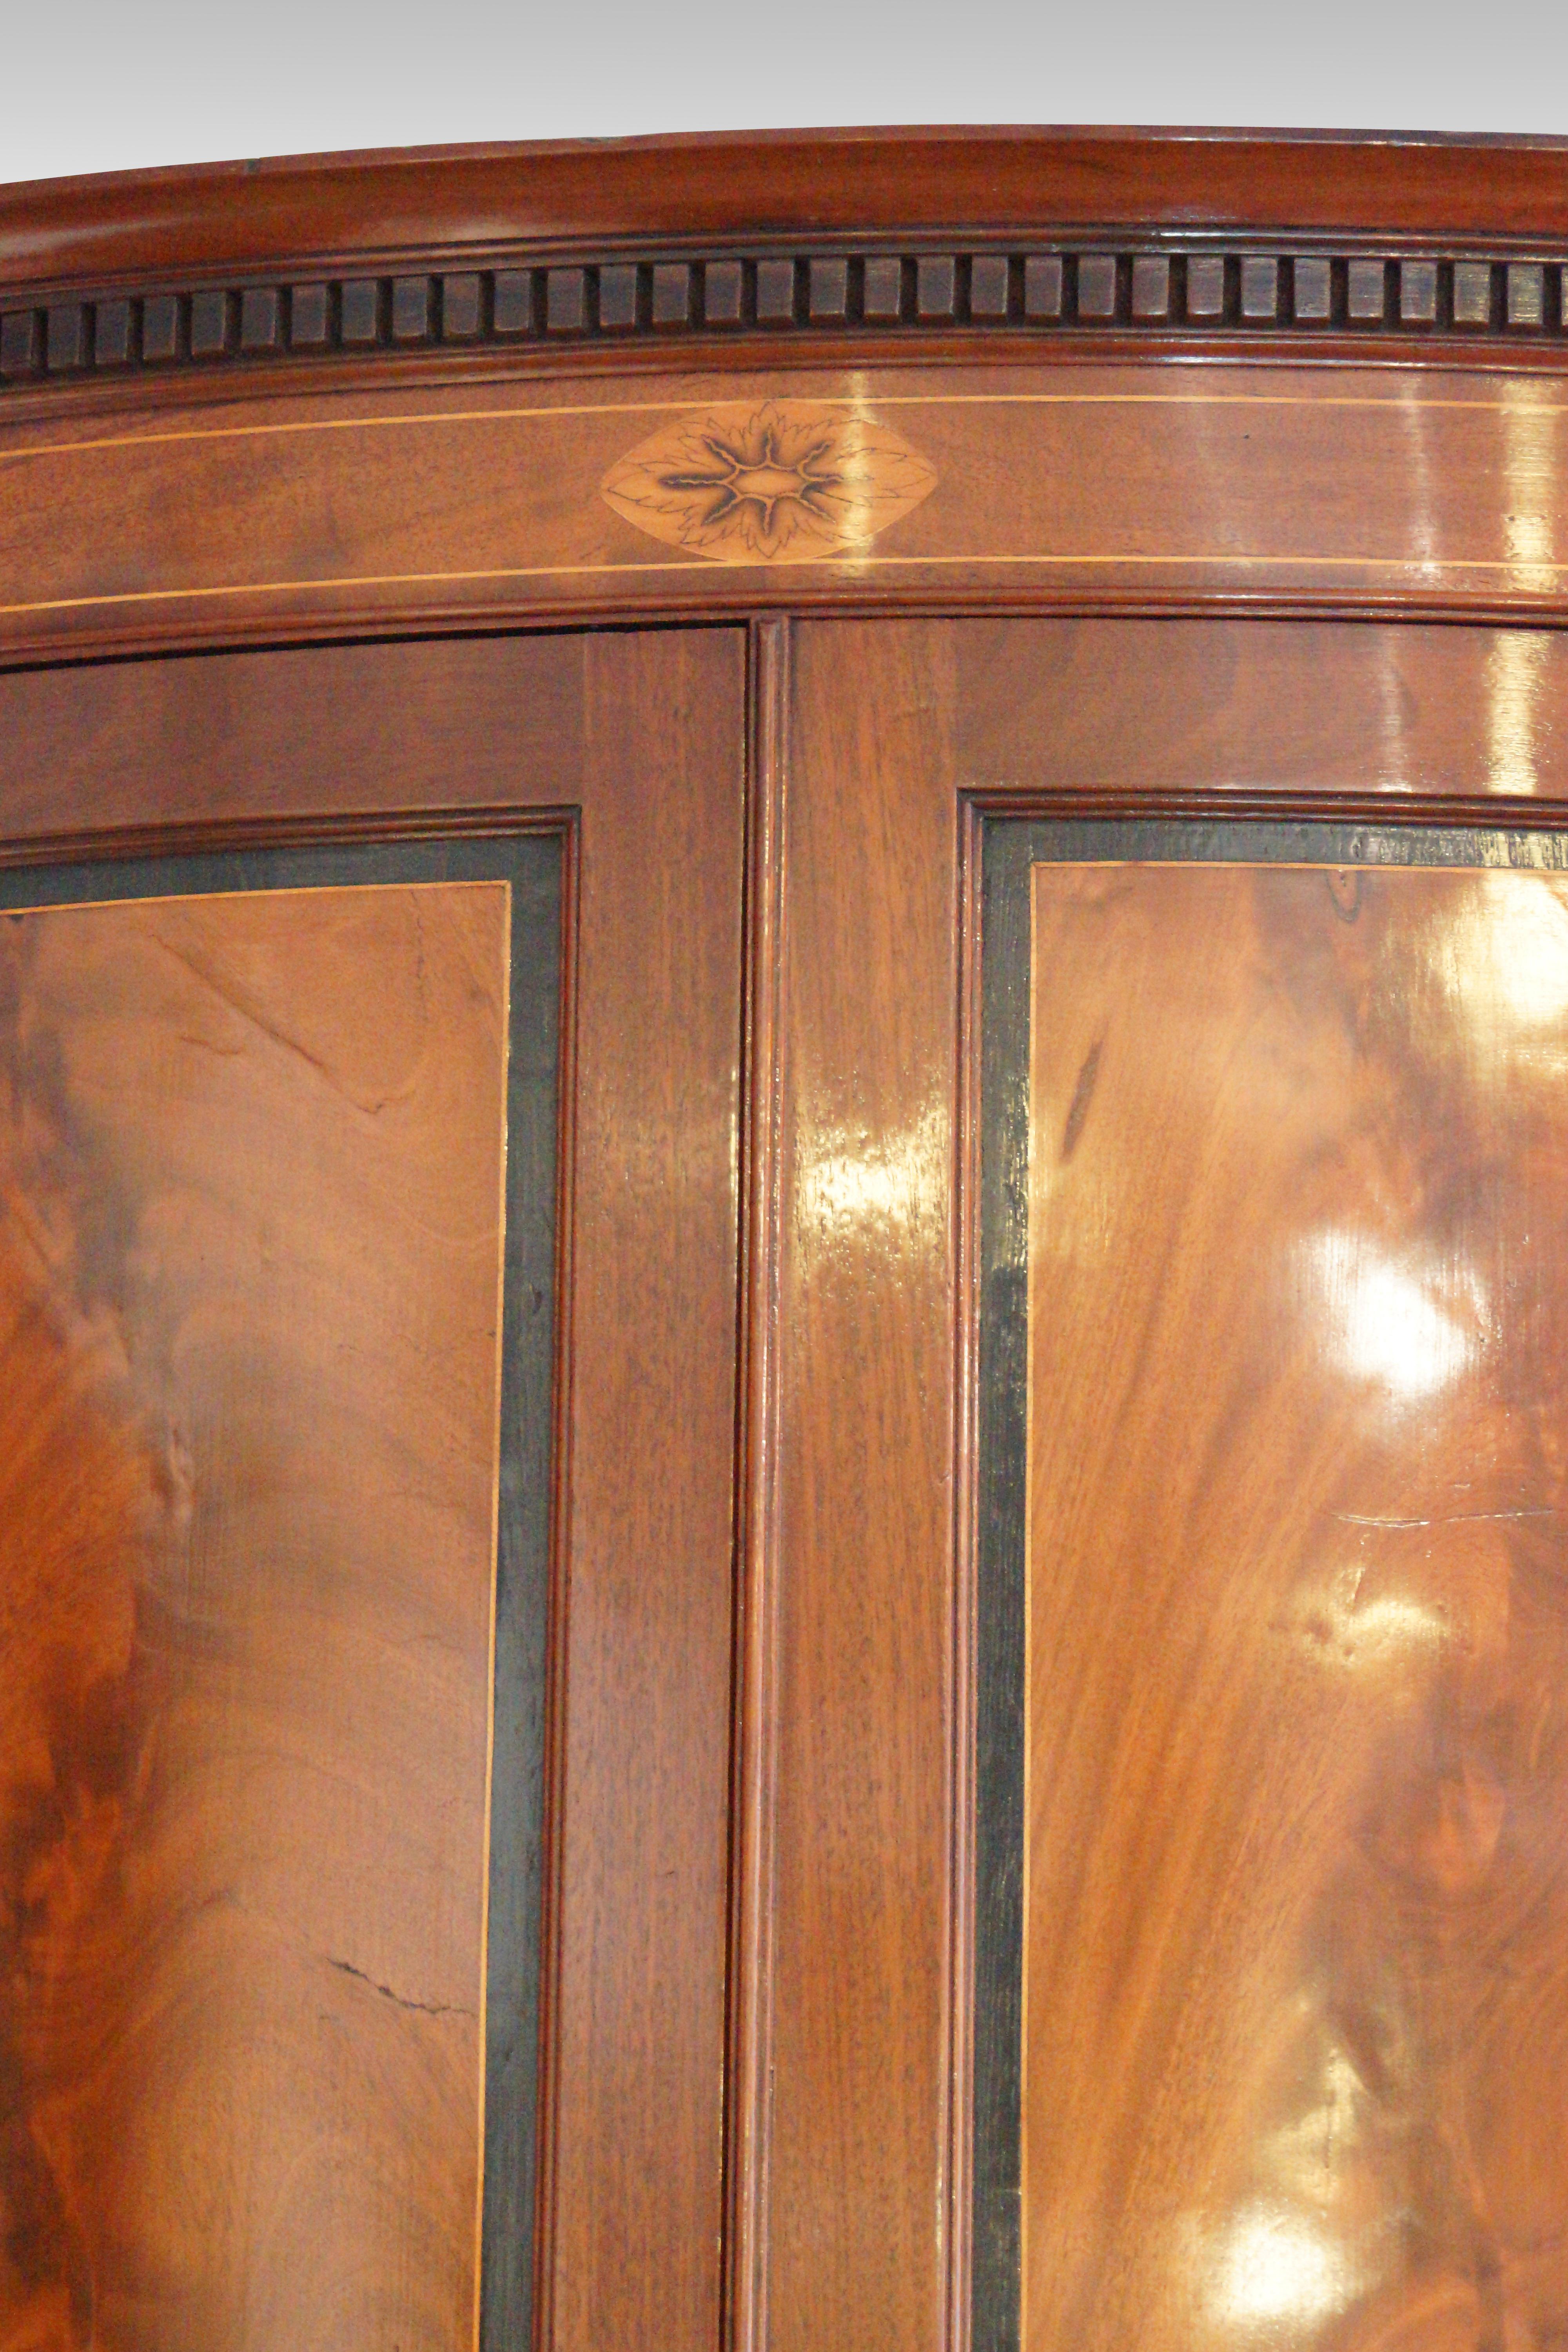 Georgian bow front mahogany hanging corner cabinet
Here we can offer you this Georgian bow front mahogany hanging corner cabinet, that was made, circa 1835
It is of the desirable bow front shape, with the doors having double panels in flame